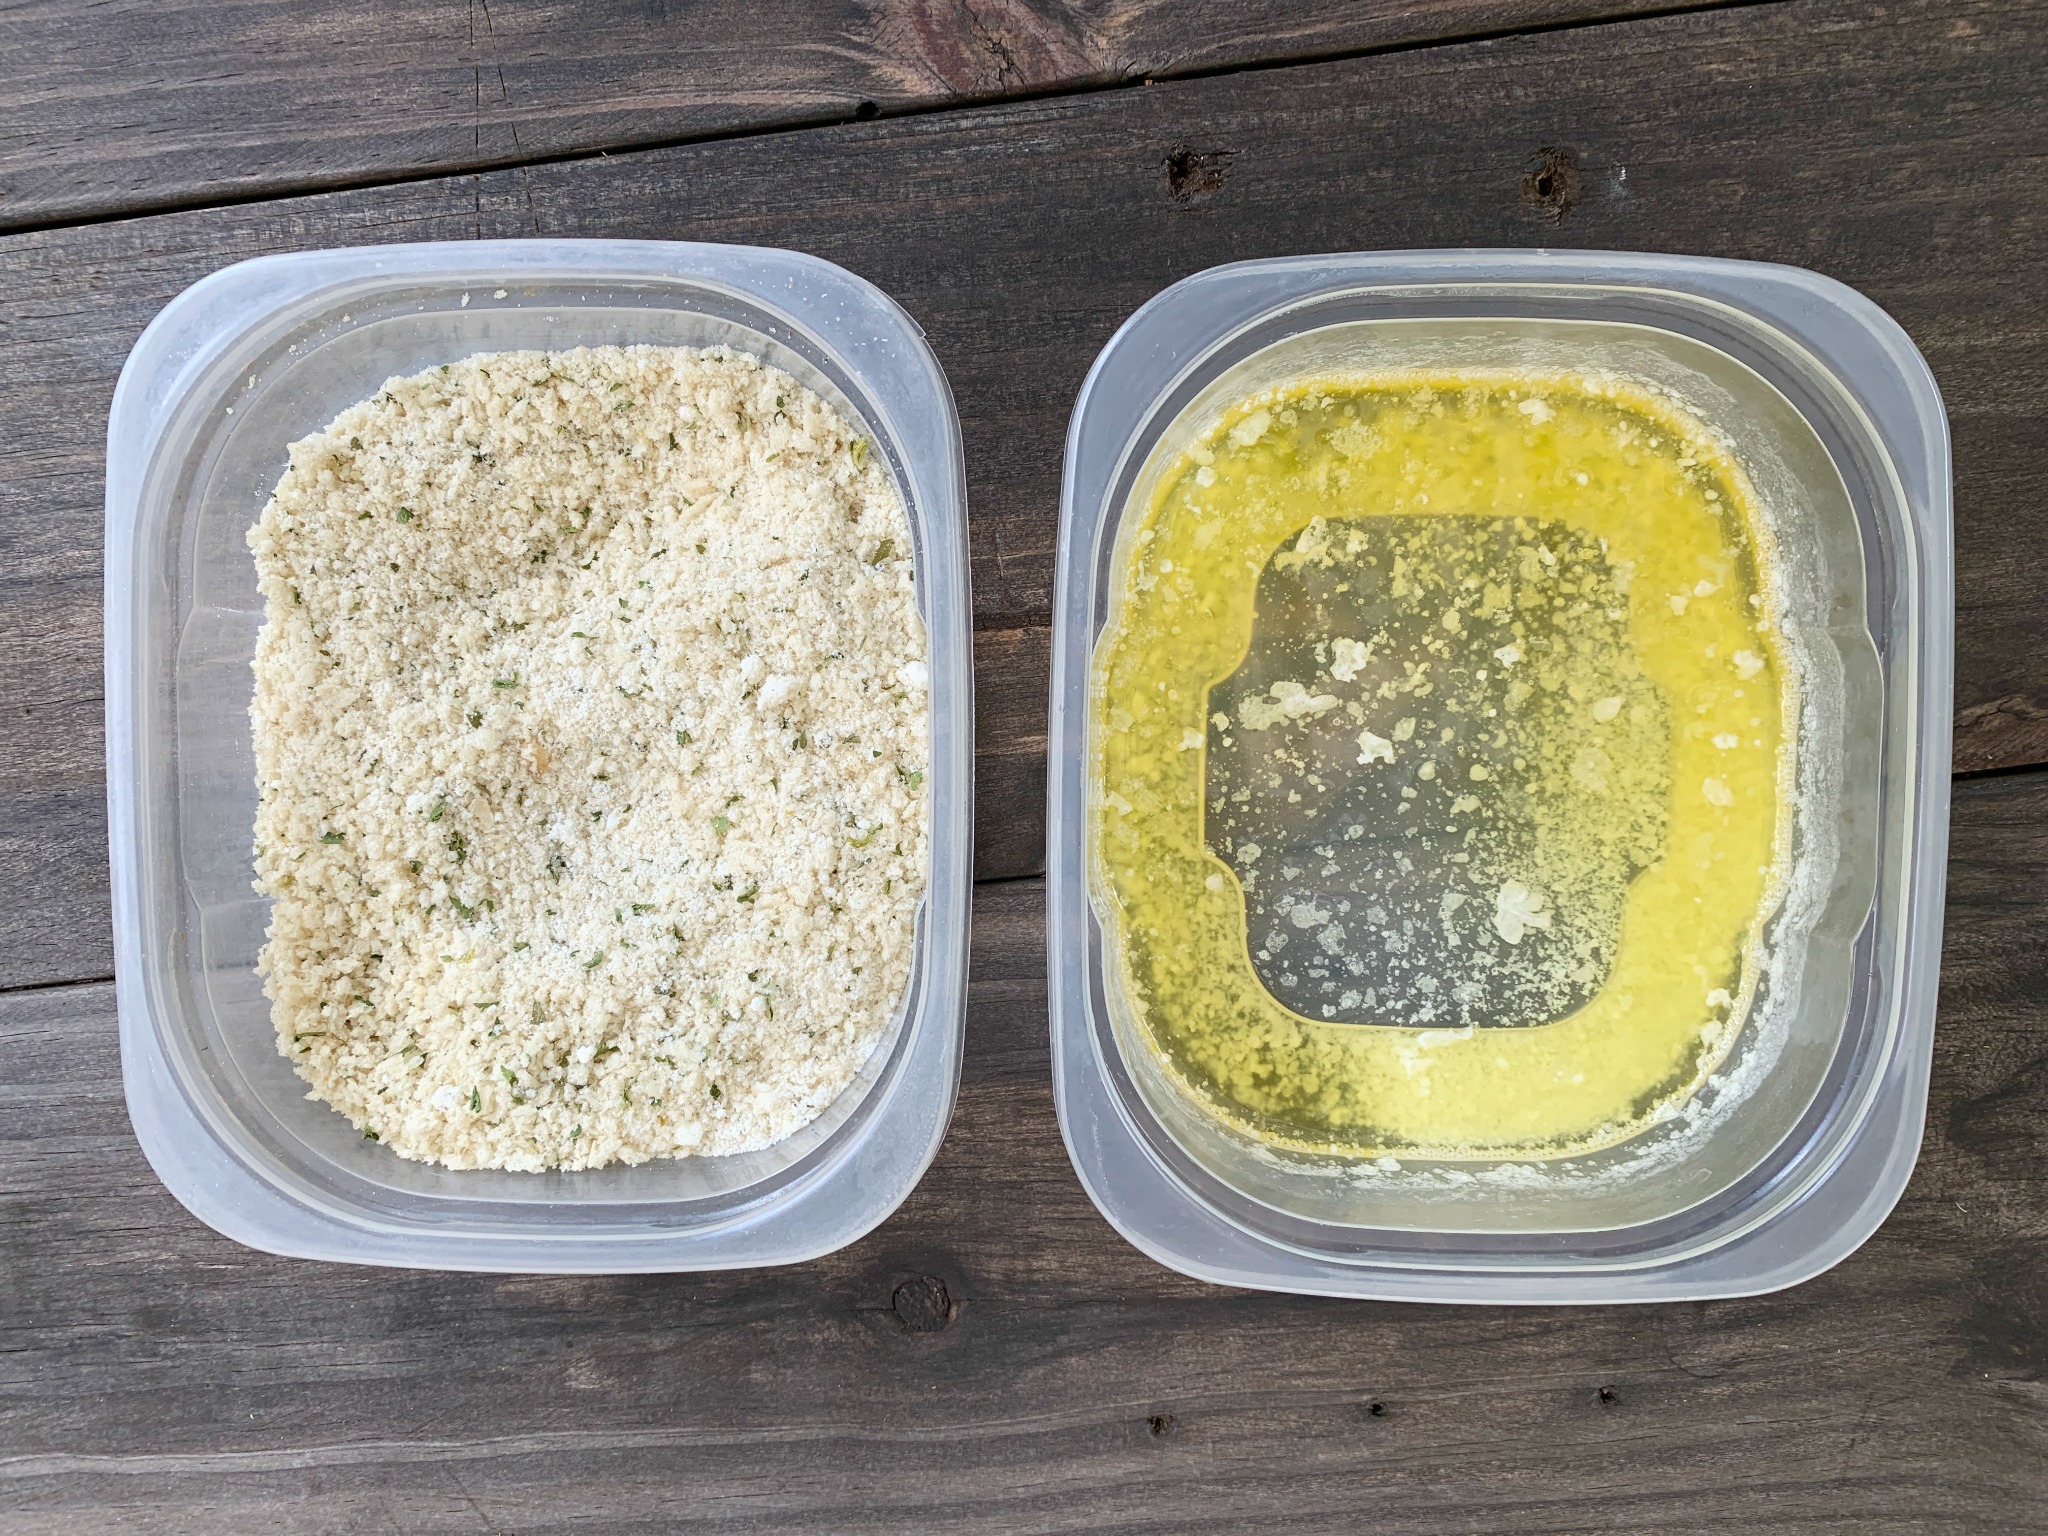 a container of panko bread crumbs and a container of melted butter